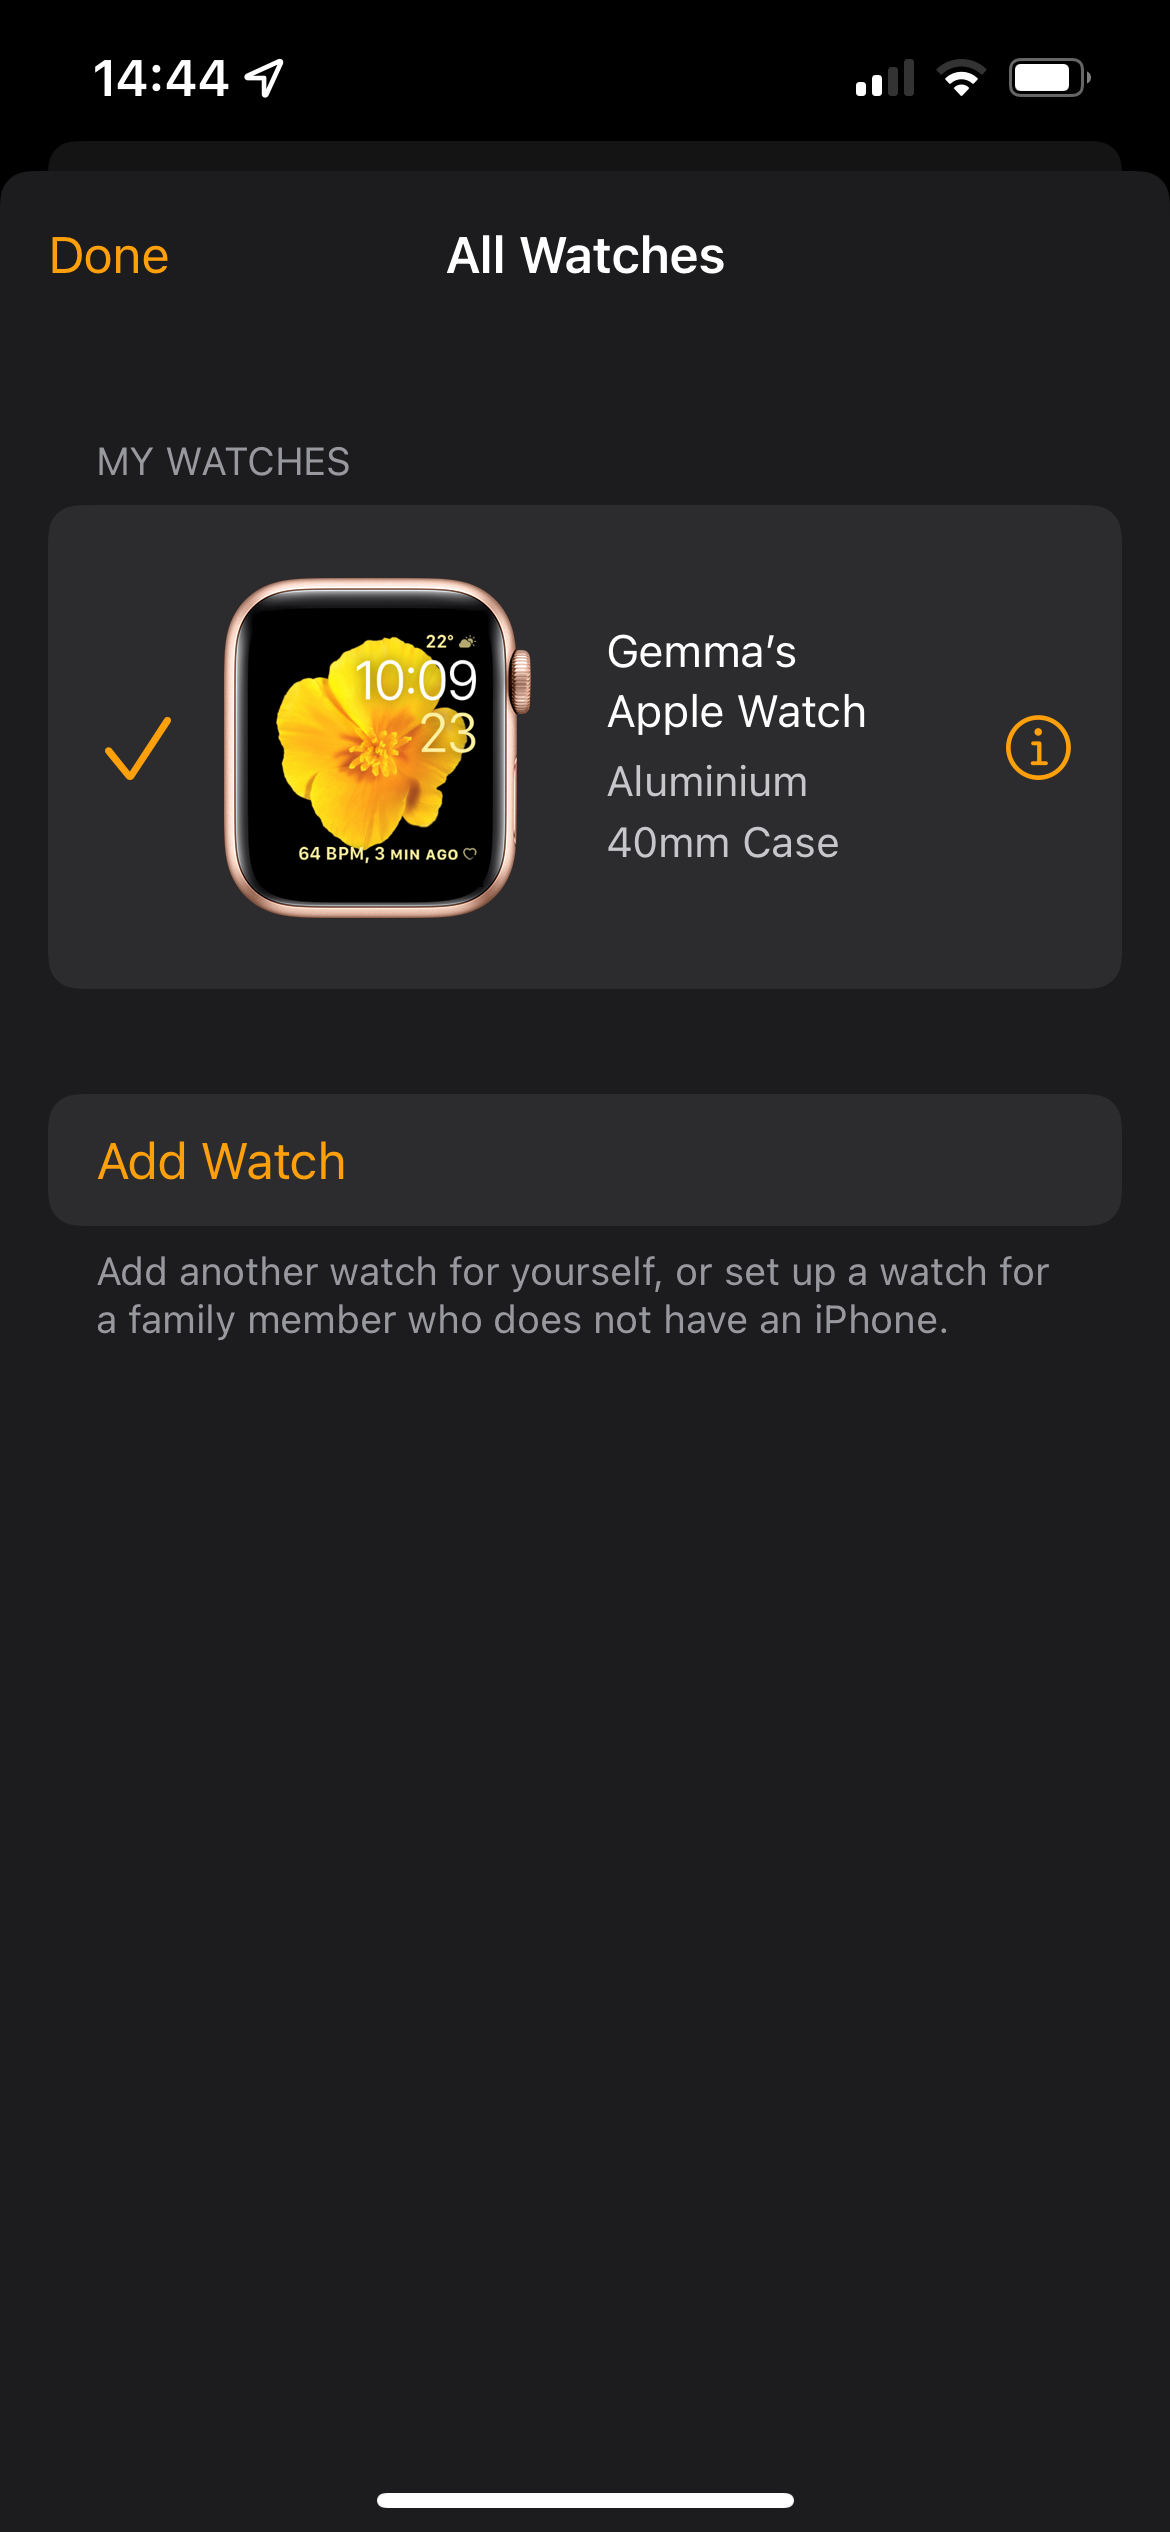 Clicking on All Watches shows this screen